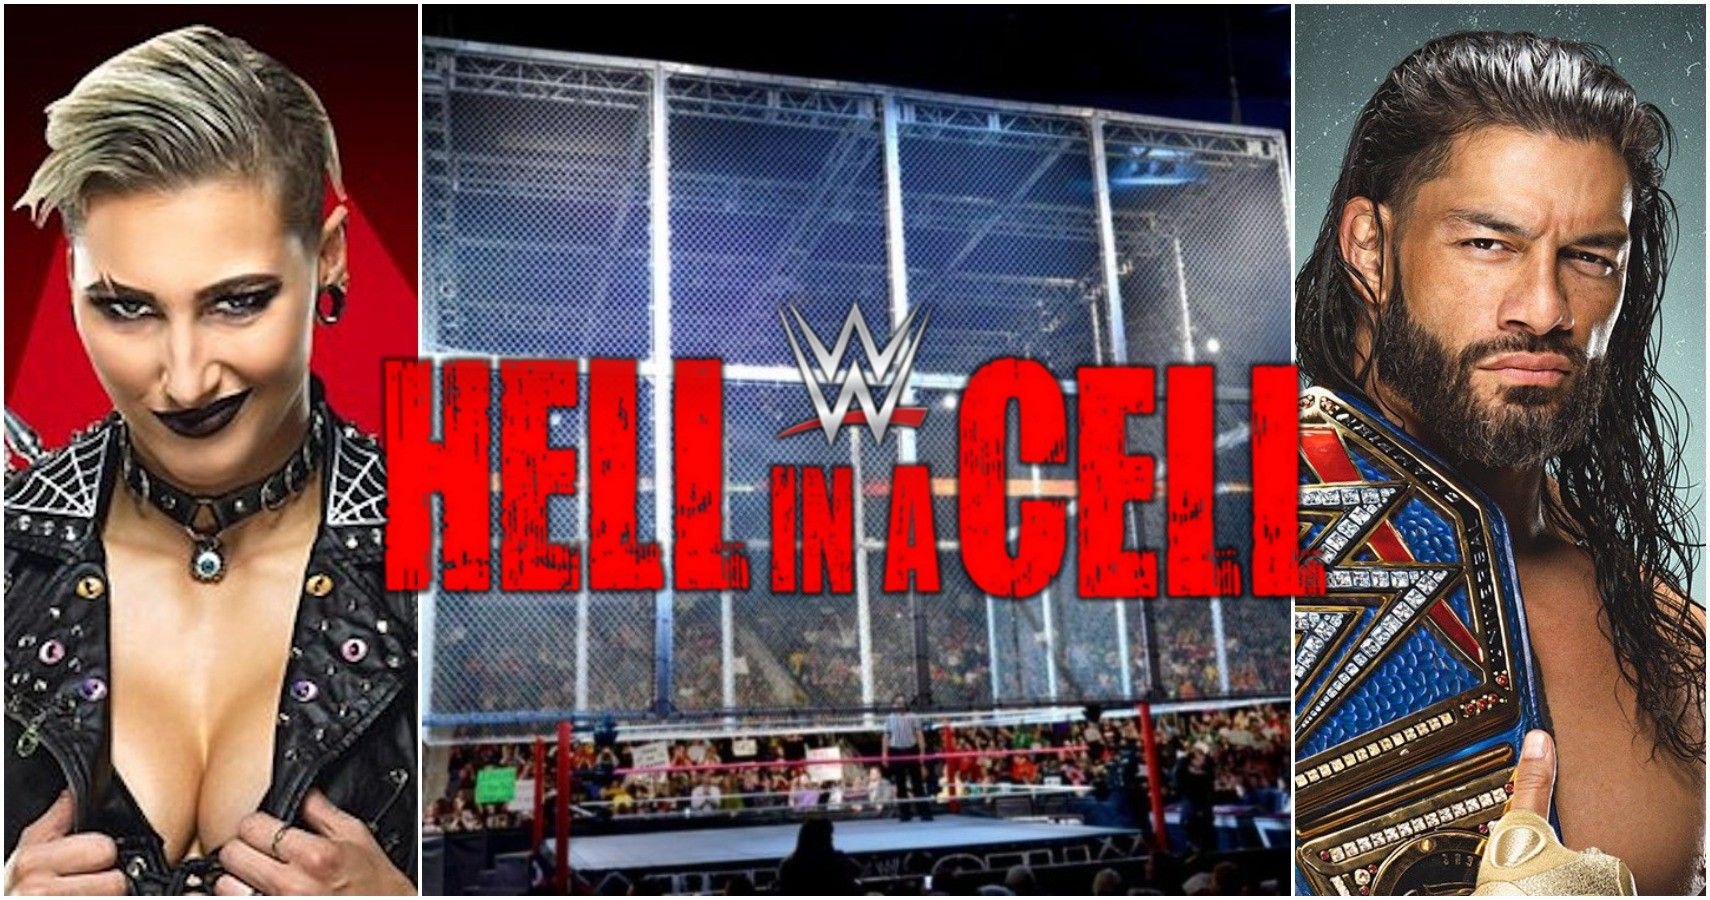 WWE Hell In A Cell 2021 Guide: Match Card, Predictions